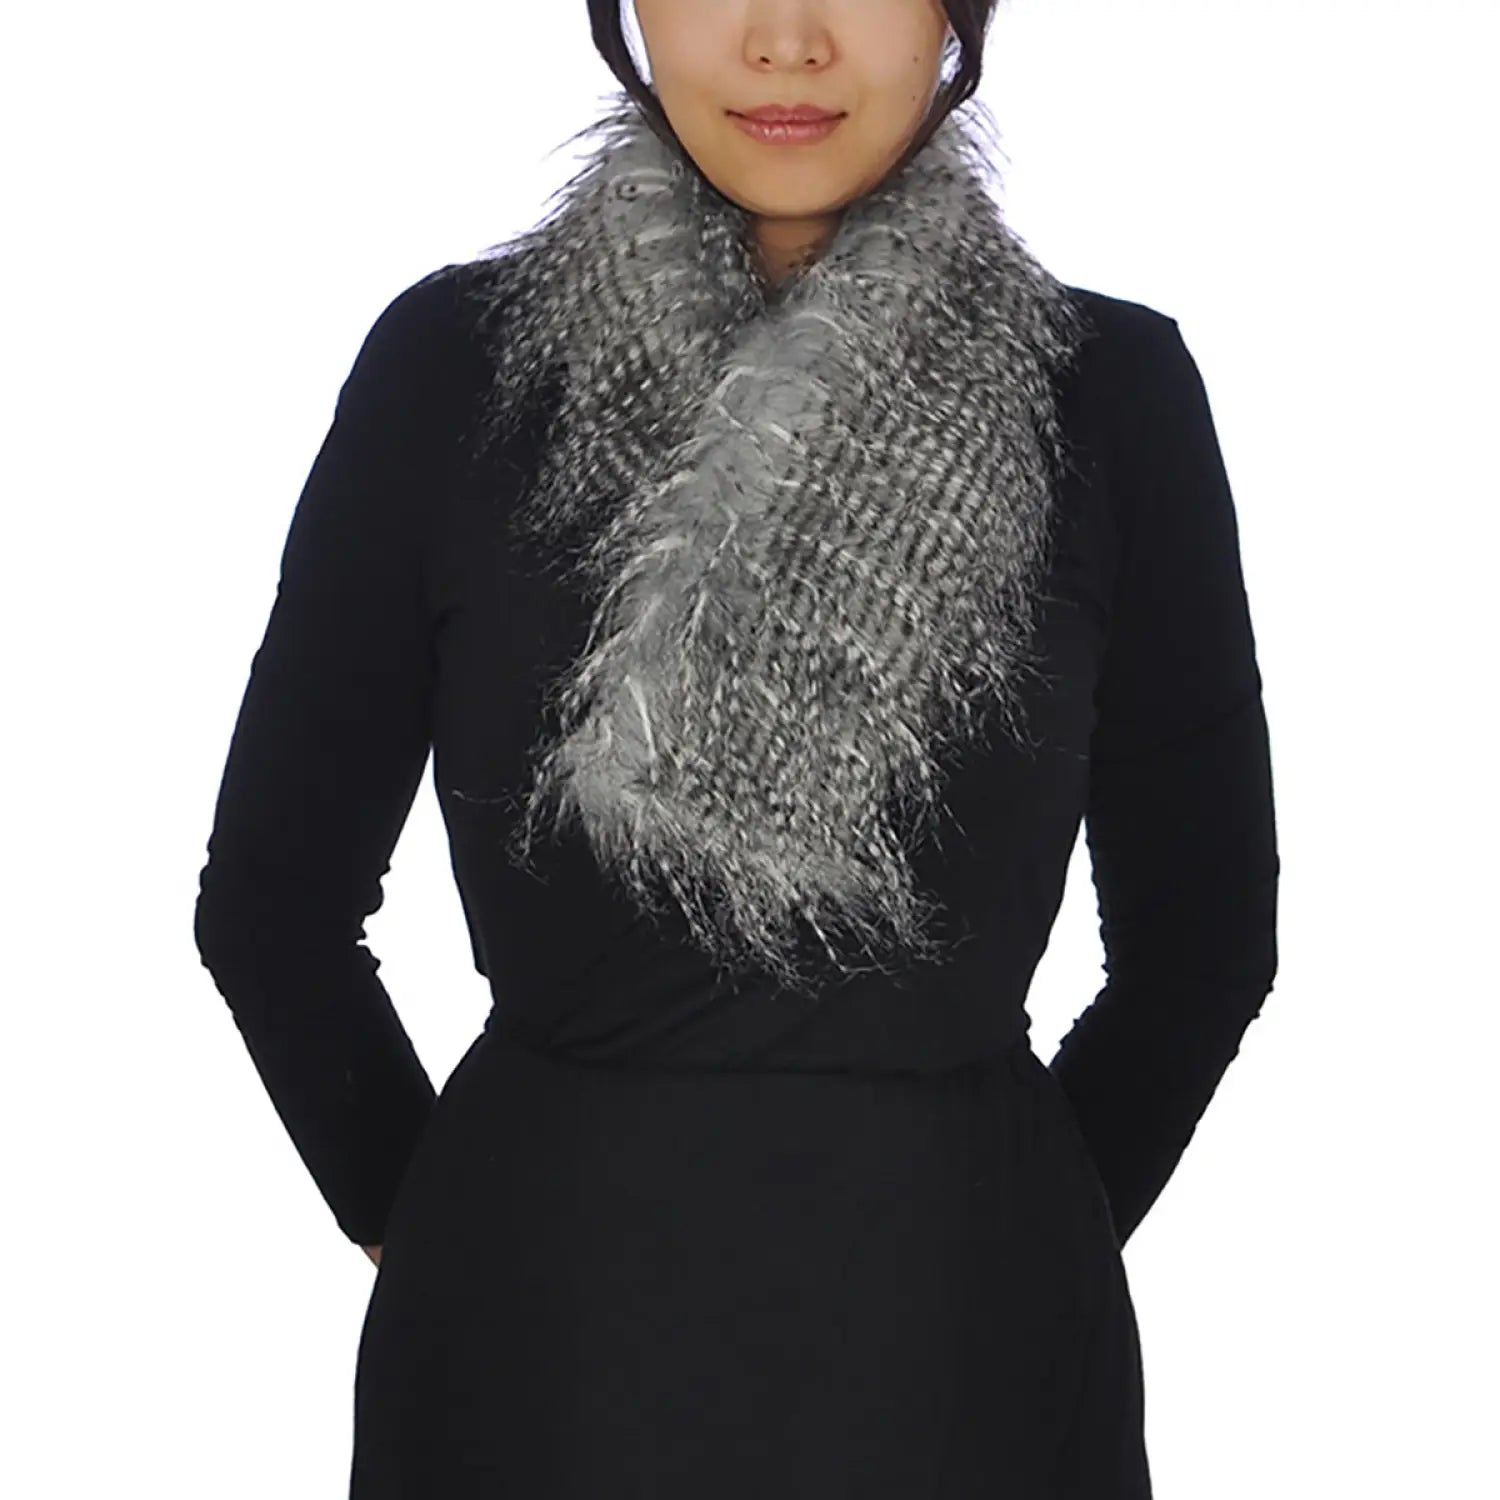 Woman wearing a black dress and a silver faux fur scarf - Luxurious Autumn Winter Wrap Stole Scarf